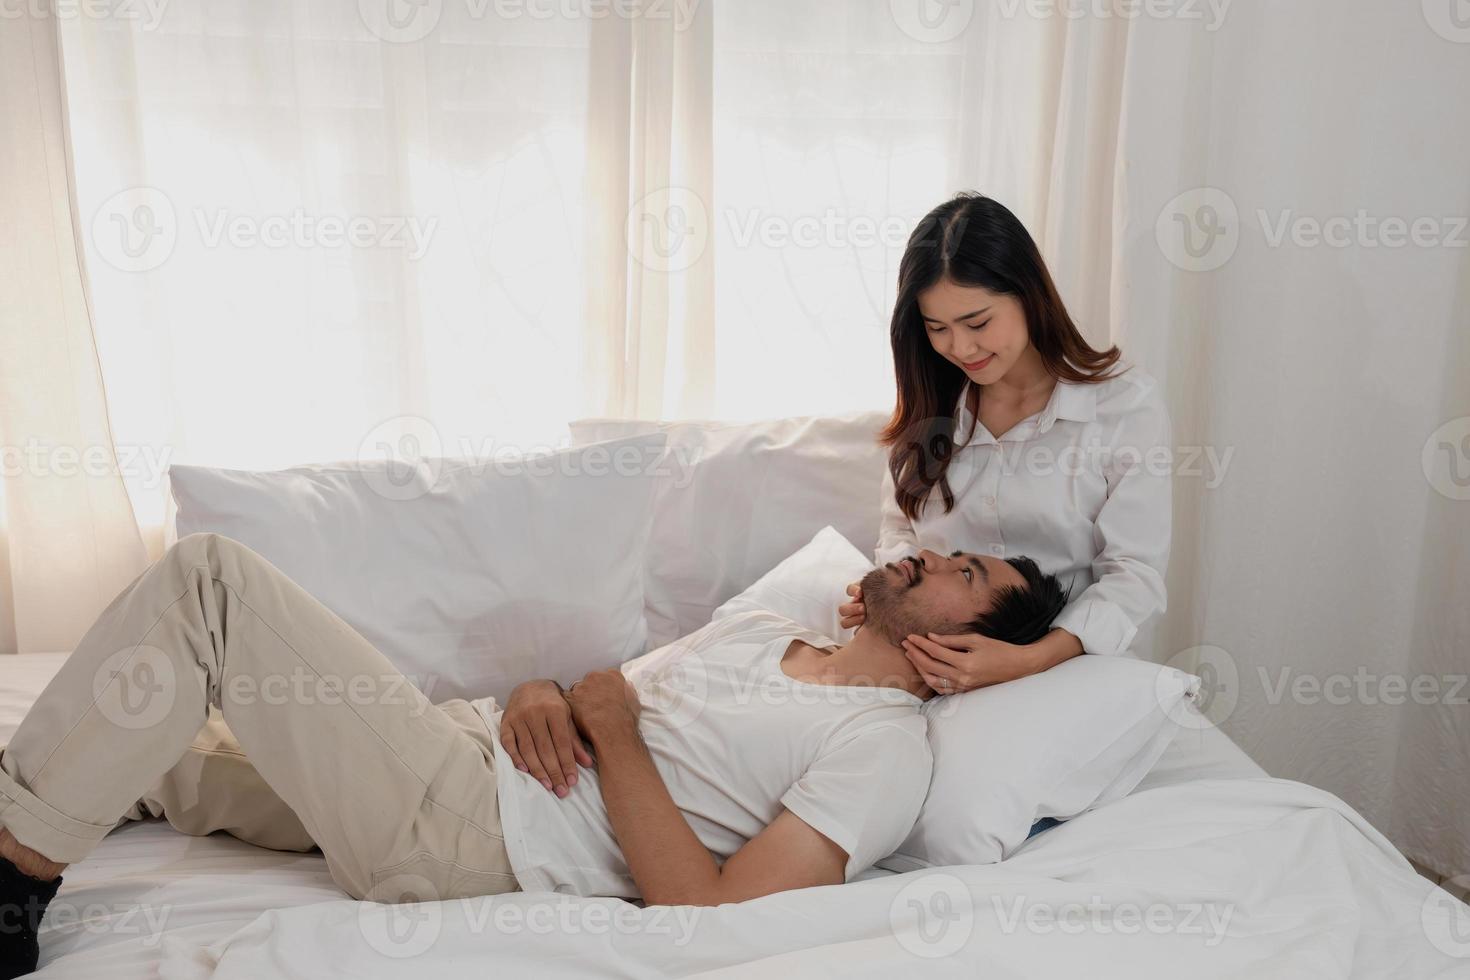 Happy young asian couple embracing, teasing, playing cheerfully in bed at home, romantic time to enhance family bonding. family concept. photo